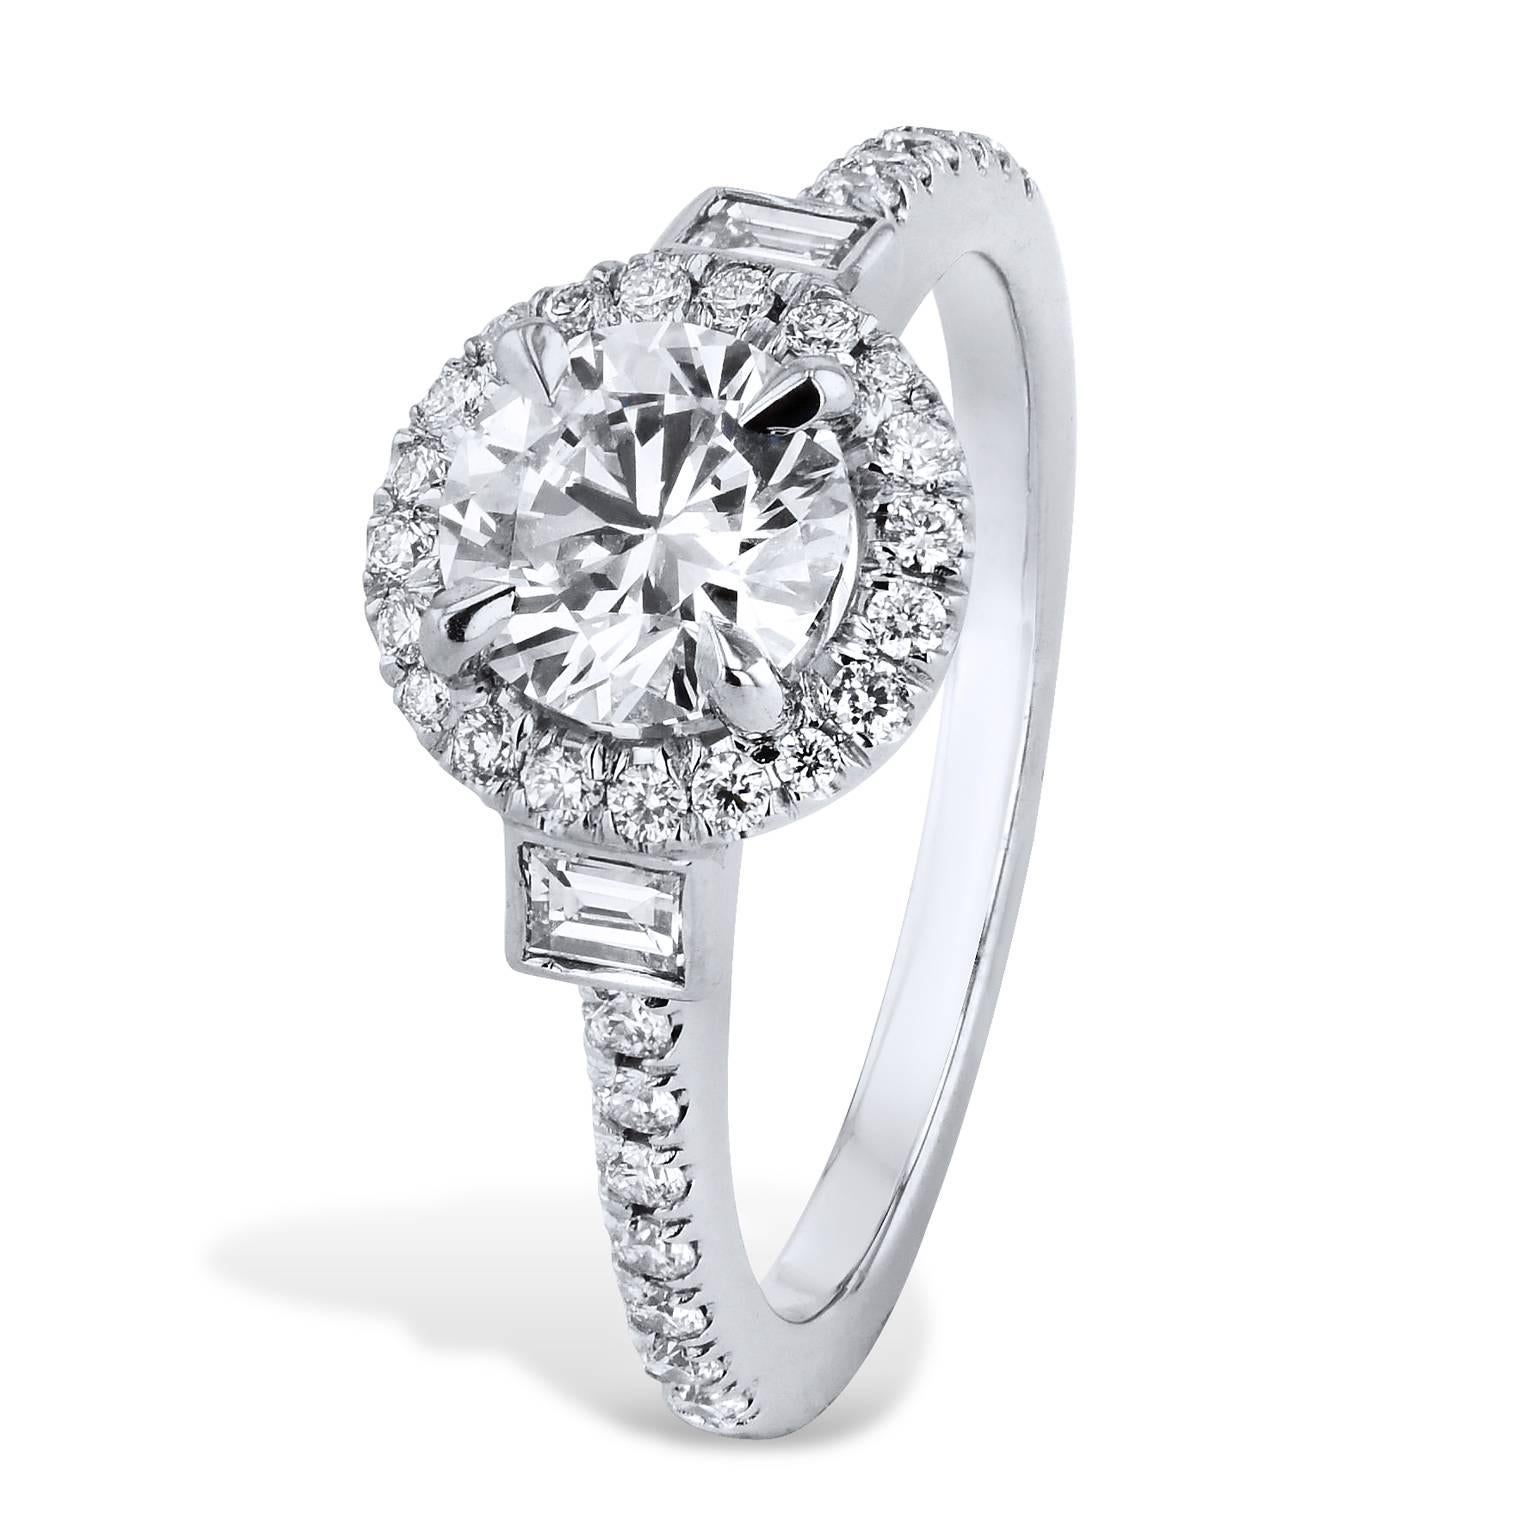 This platinum engagement ring features a 1.00 carat round prong-set diamond (E/VS1) at center. 0.20 carat of round diamonds are pave-set in halo surrounding the center diamond (D/E/VS) as 0.14 carat of pave-set diamond cascade down the shank